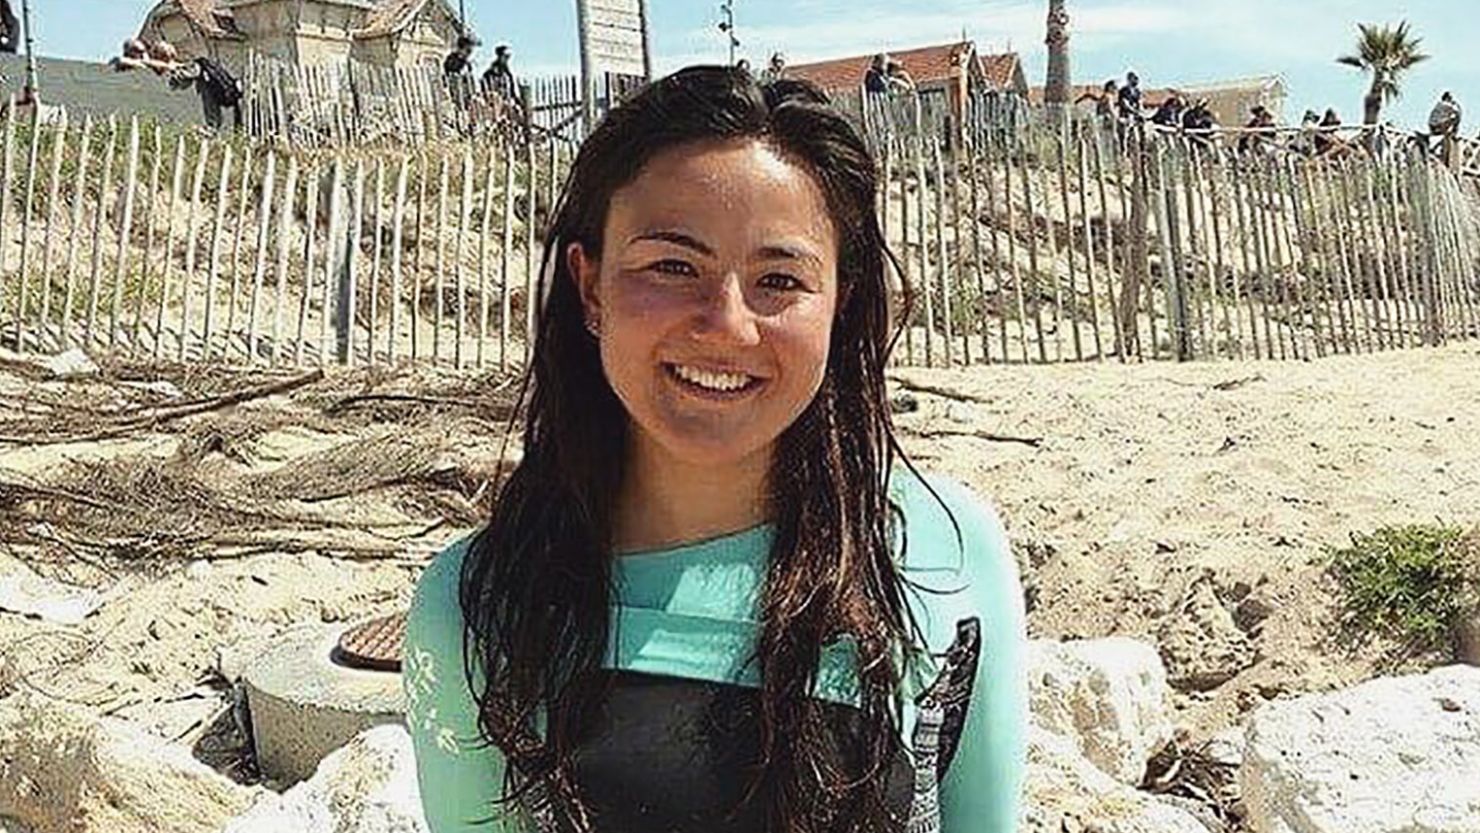 French surfer Poeti Norac has died aged 24, according to the French Surfing Federation.